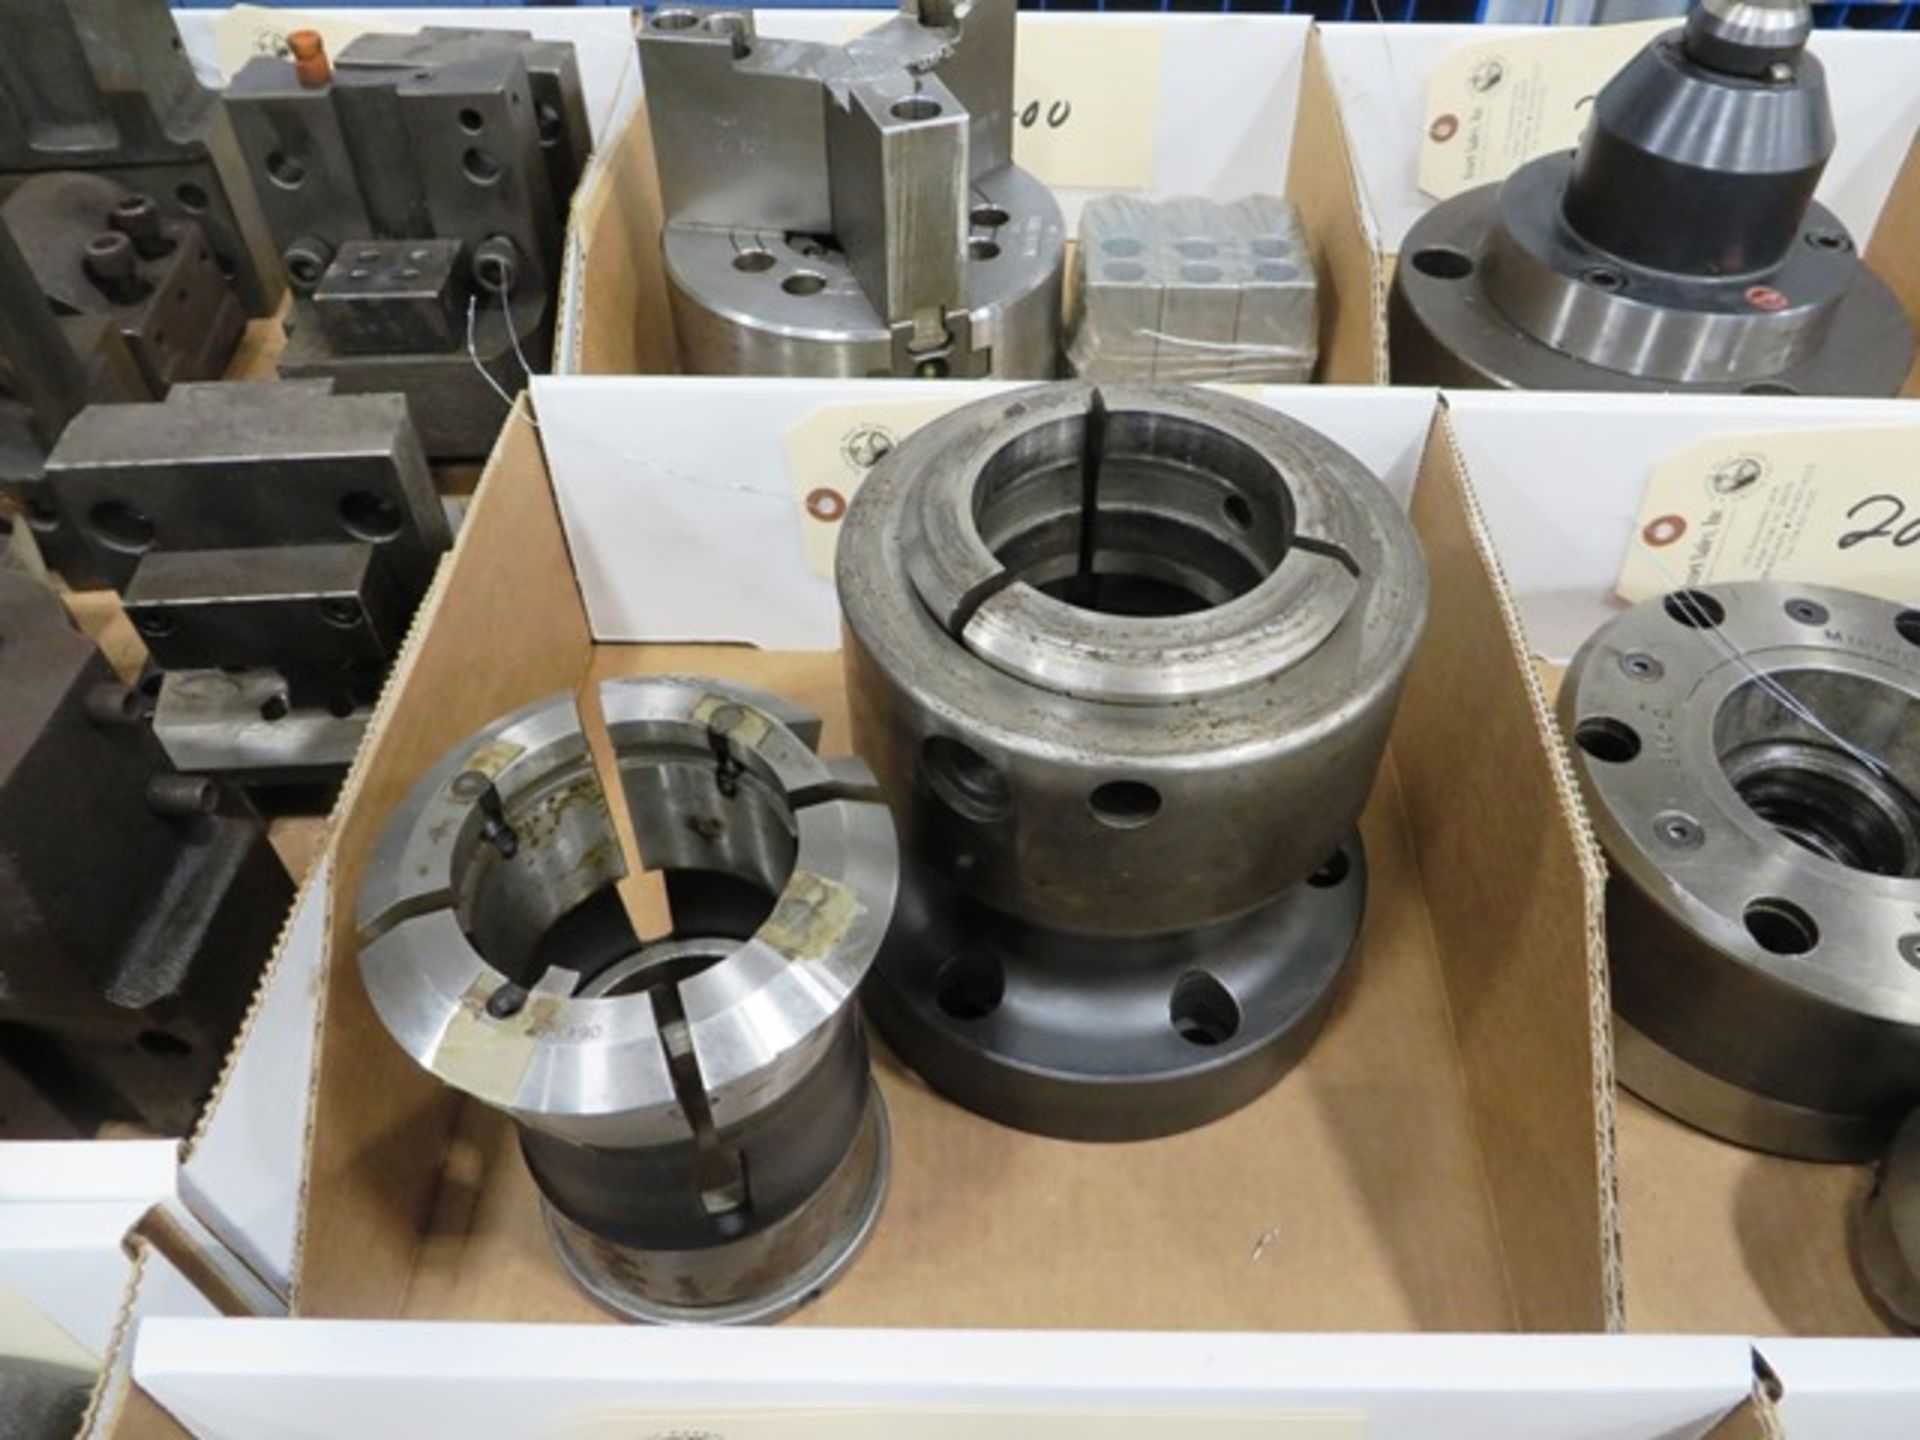 Hardinge Collet Chuck with S26 Collet